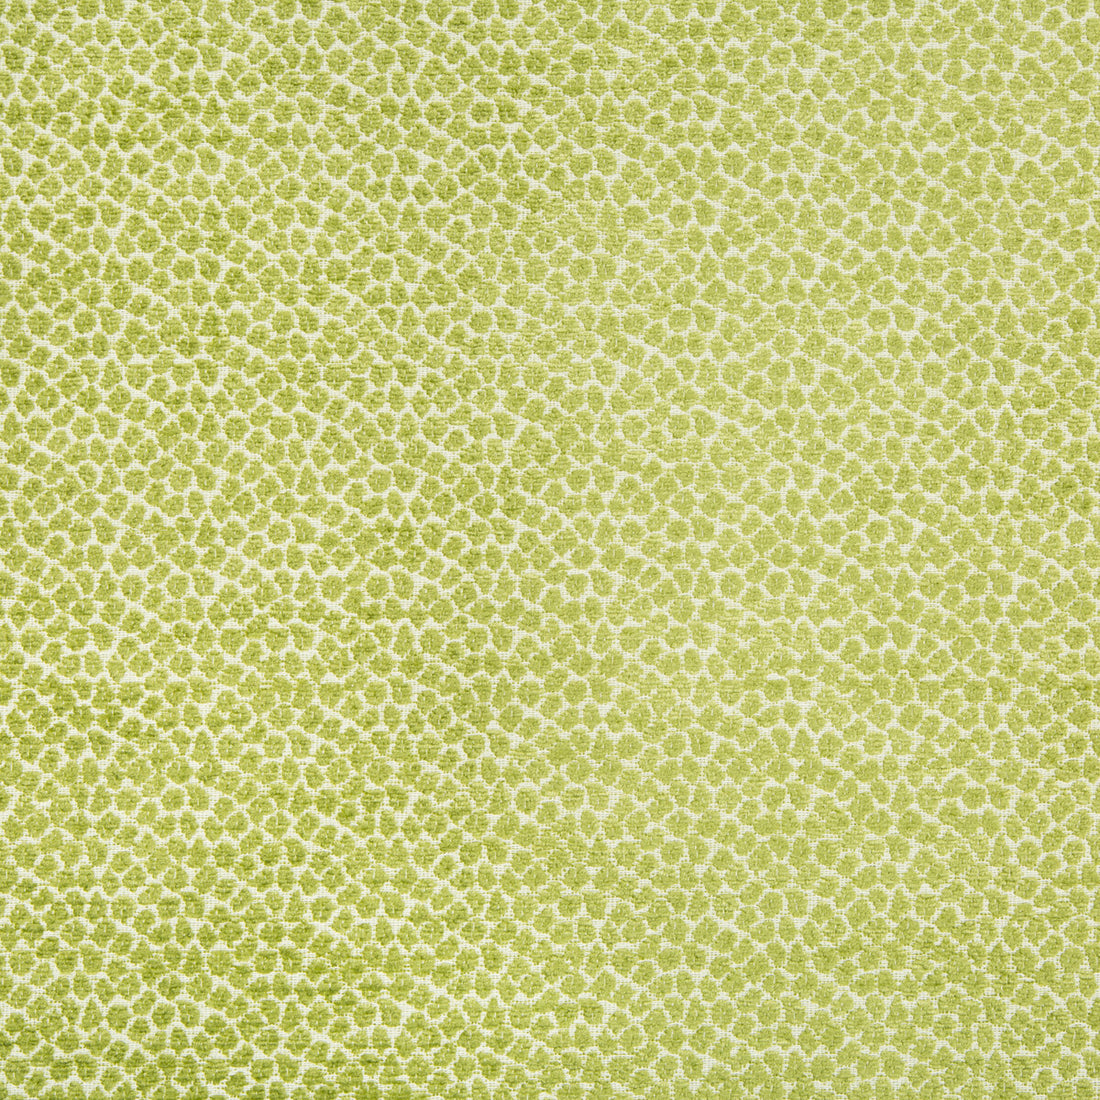 Kravet Contract fabric in 34745-3 color - pattern 34745.3.0 - by Kravet Contract in the Crypton Incase collection